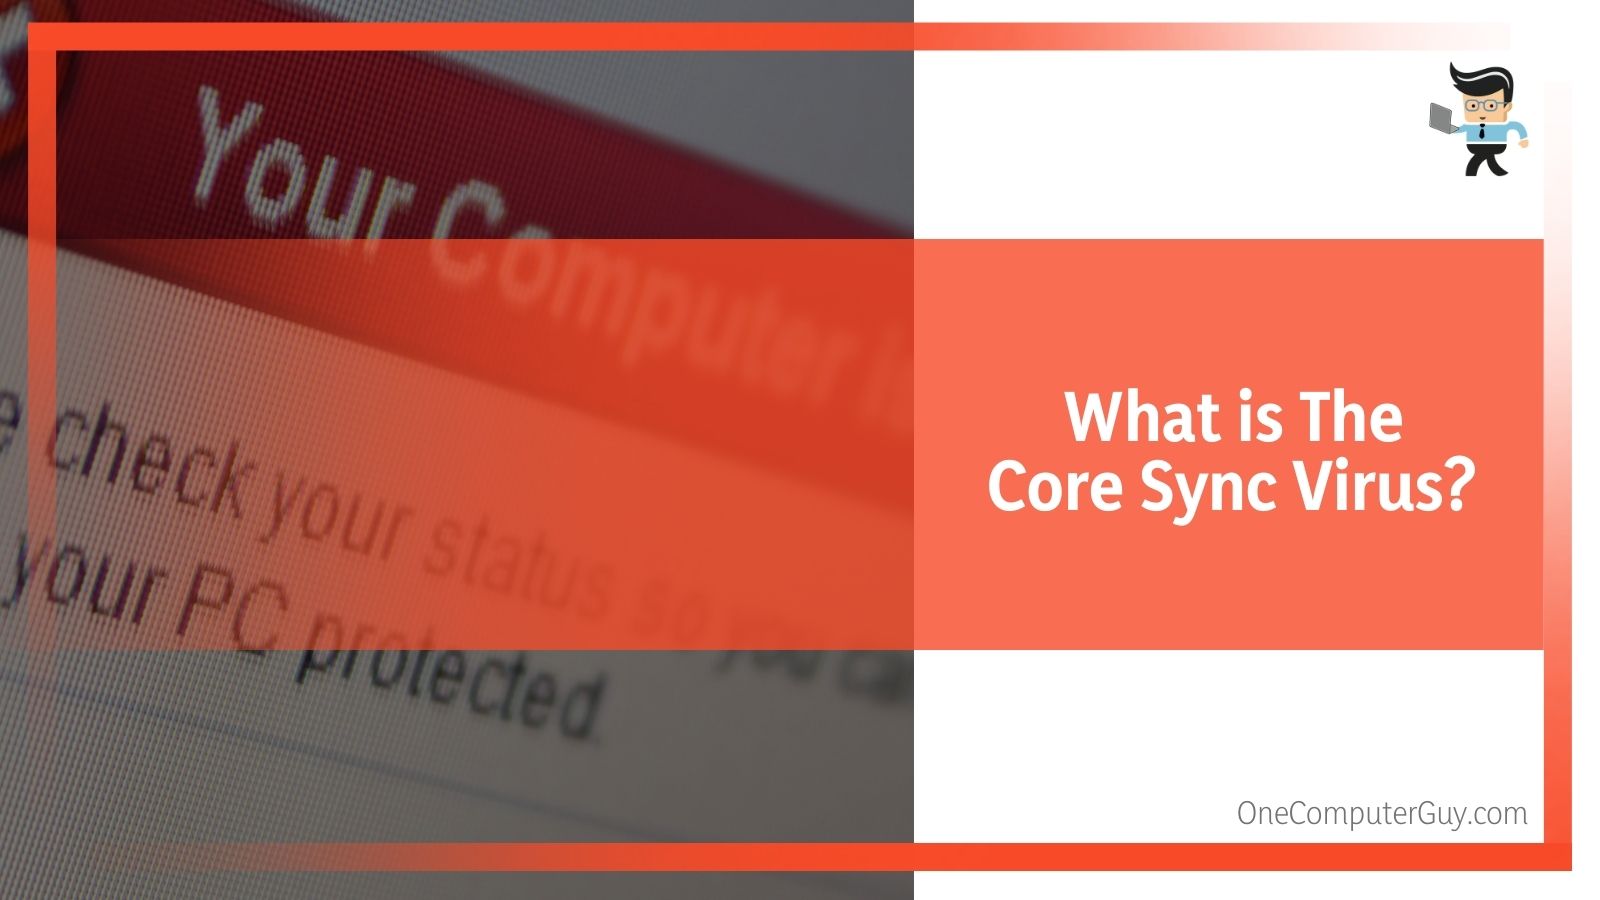 What is The Core Sync Virus